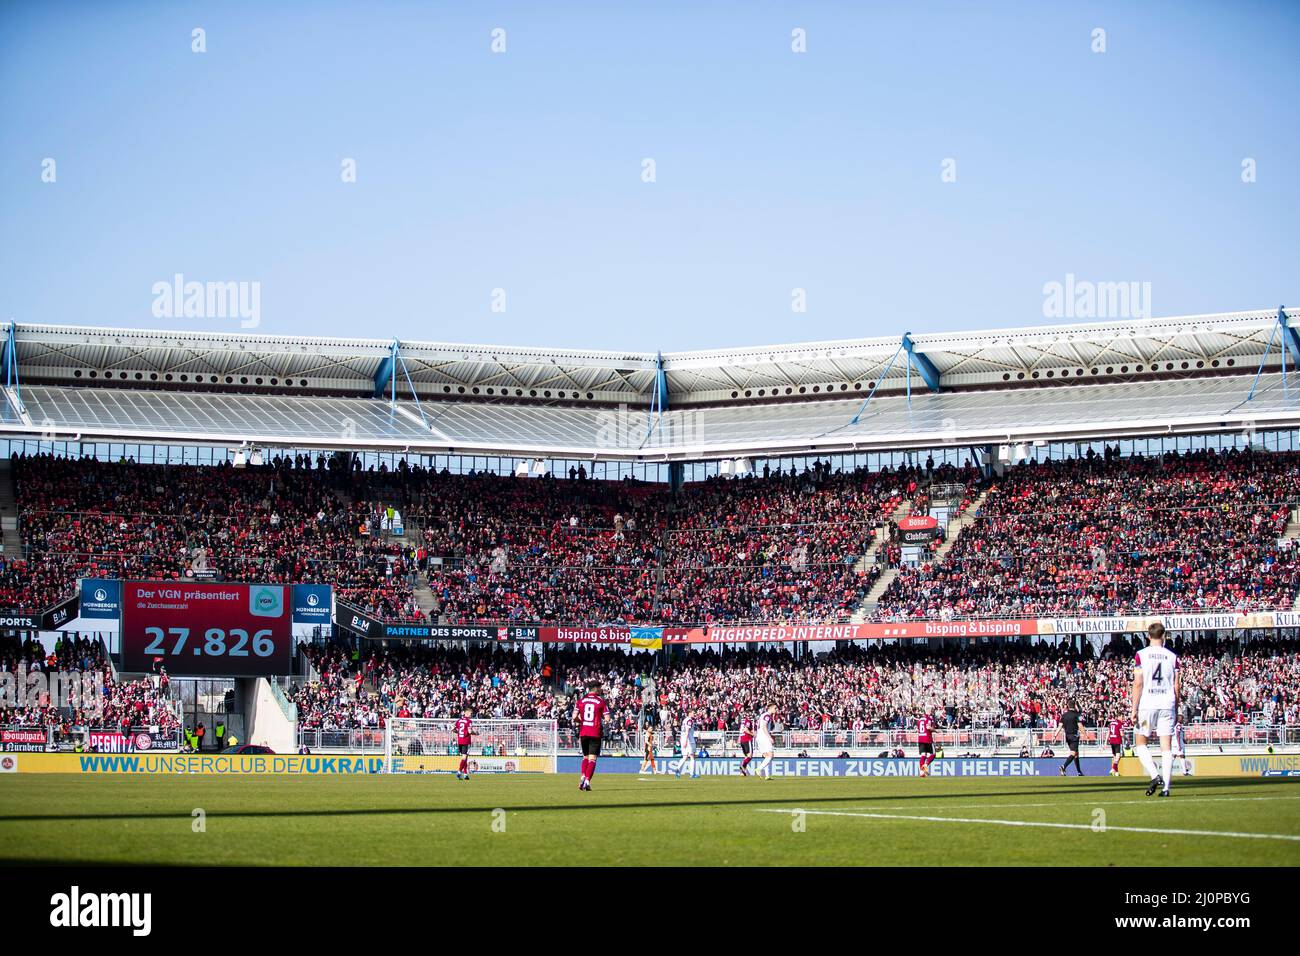 Nuremberg, Germany. 20th Mar, 2022. Soccer: 2. Bundesliga, 1. FC Nürnberg - Dynamo Dresden, 27. matchday, Max-Morlock-Stadion. Overview of Max Morlock Stadium during the match with spectators. The scoreboard shows the number of spectators 27,826 Credit: Tom Weller/dpa - IMPORTANT NOTE: In accordance with the requirements of the DFL Deutsche Fußball Liga and the DFB Deutscher Fußball-Bund, it is prohibited to use or have used photographs taken in the stadium and/or of the match in the form of sequence pictures and/or video-like photo series./dpa/Alamy Live News Stock Photo